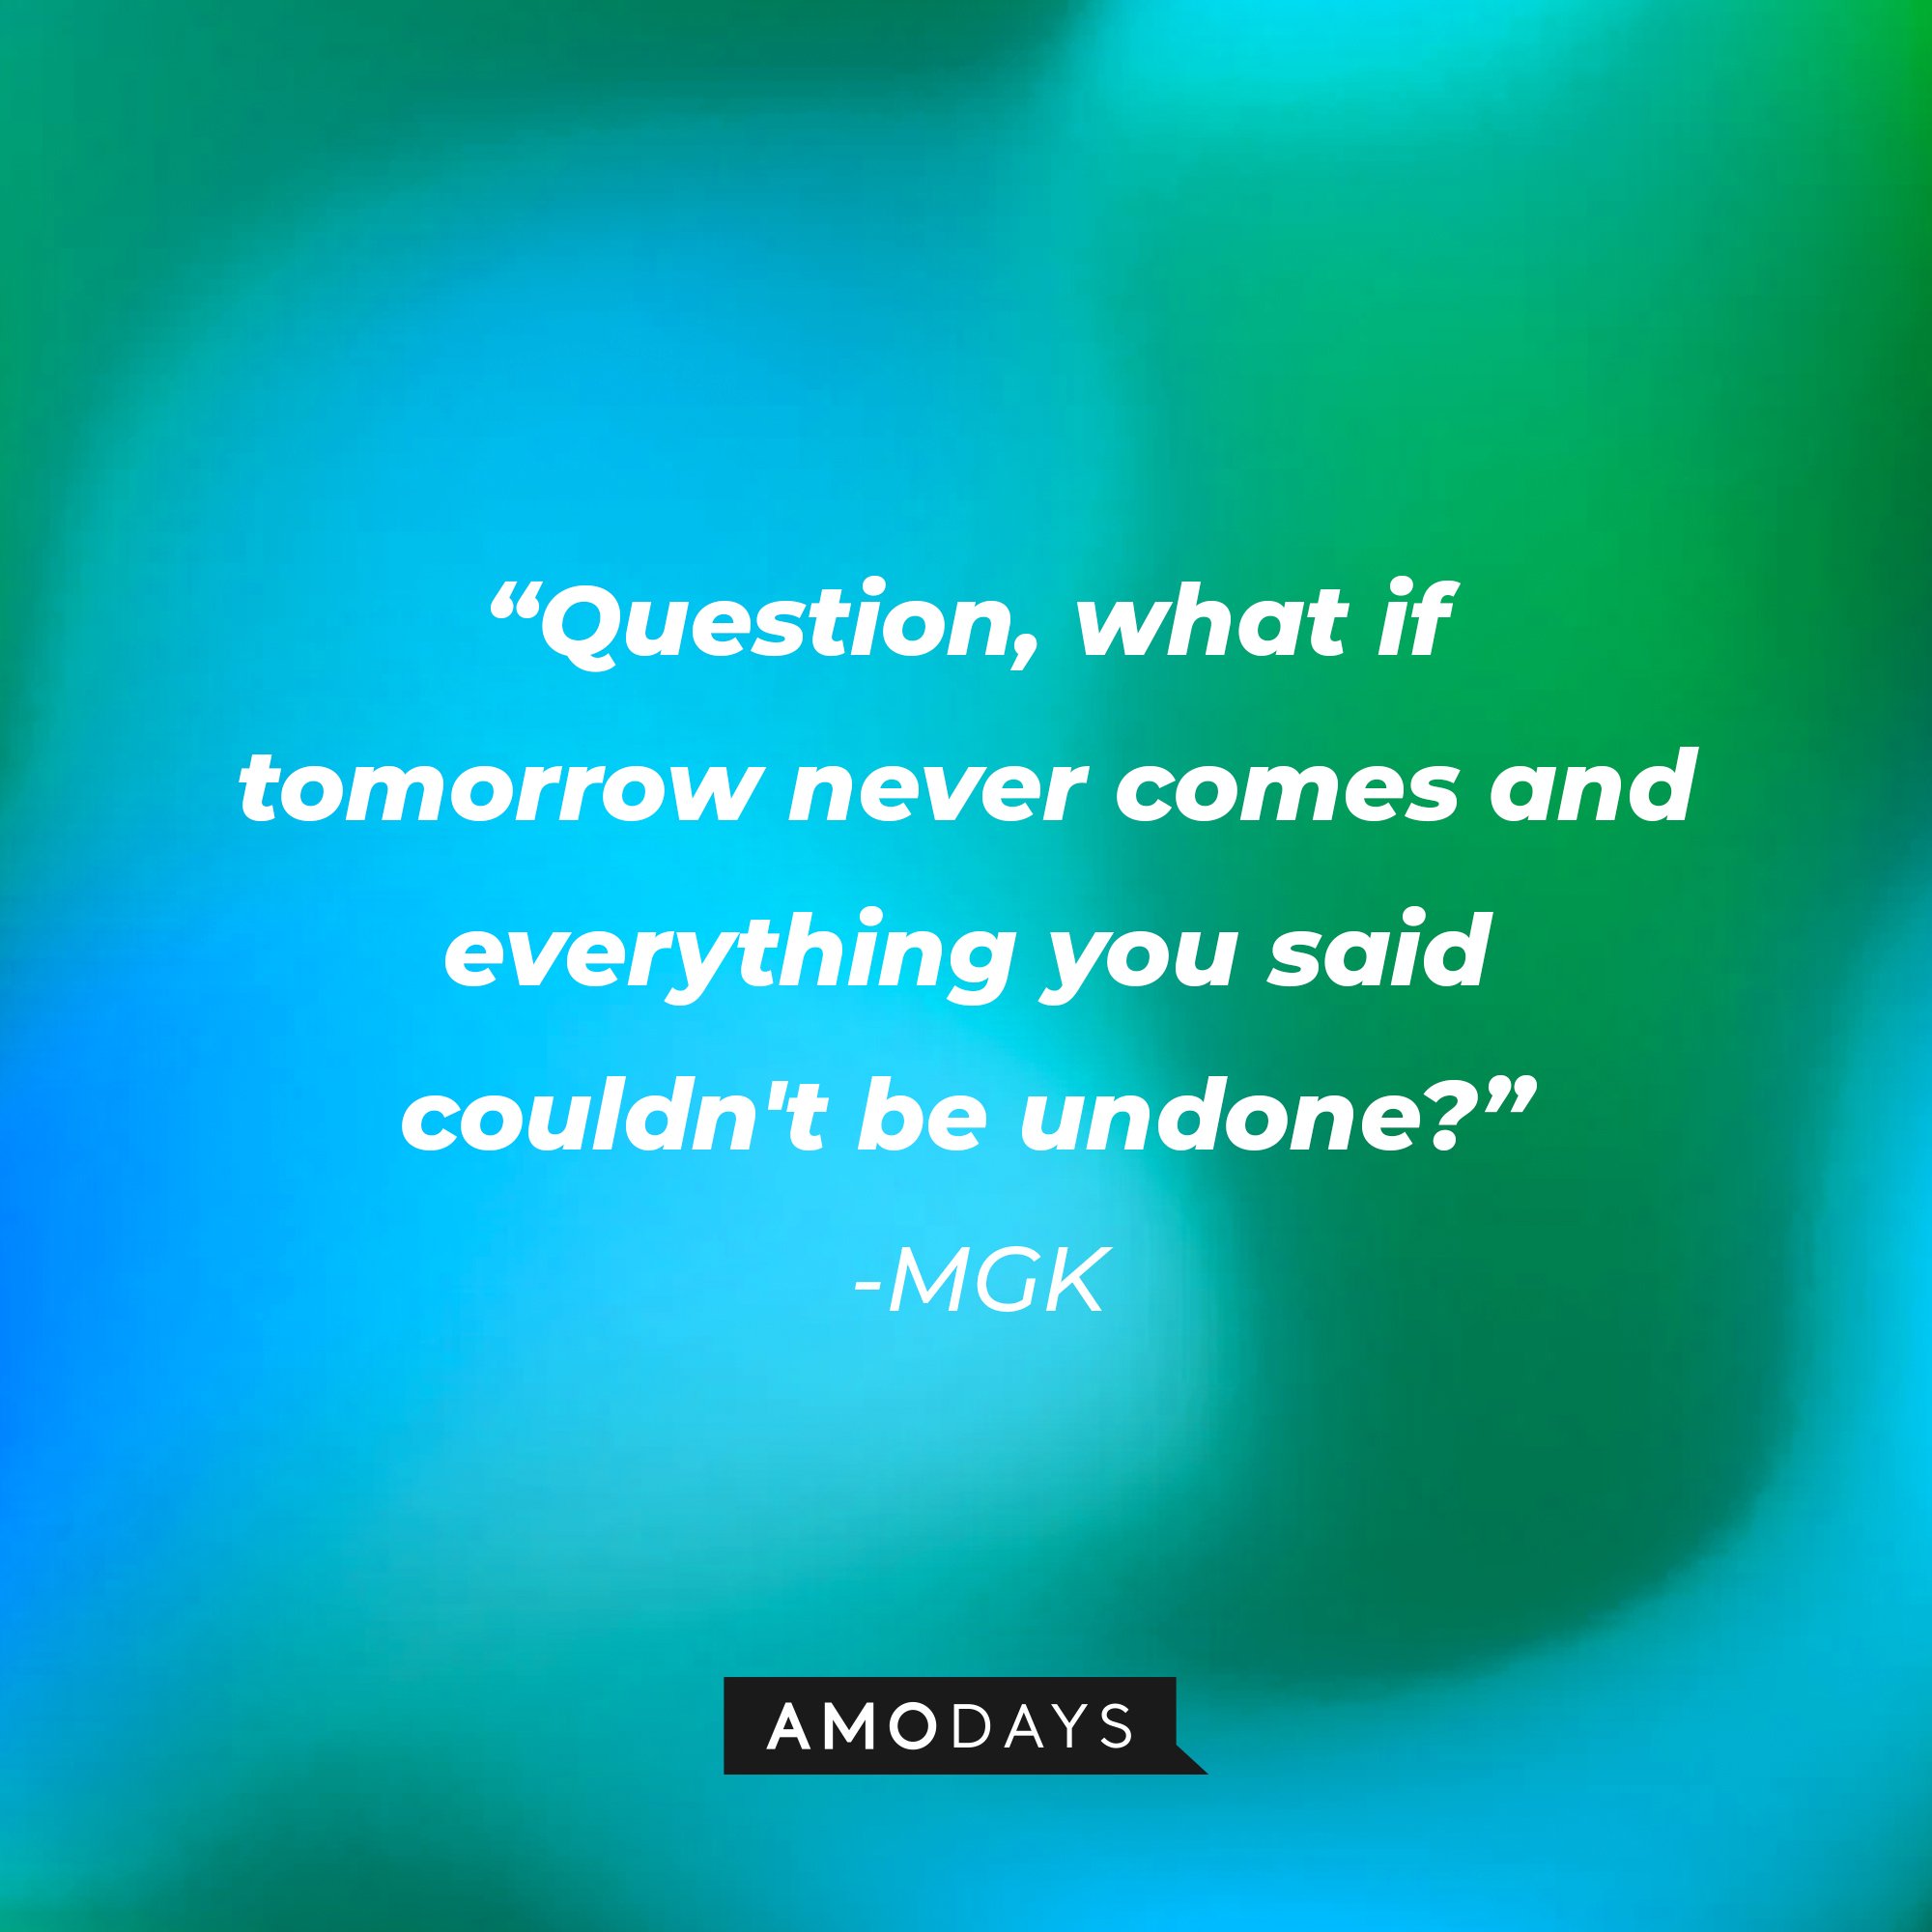 MGK's quote: "Question, what if tomorrow never comes and everything you said couldn't be undone?" | Image: AmoDays